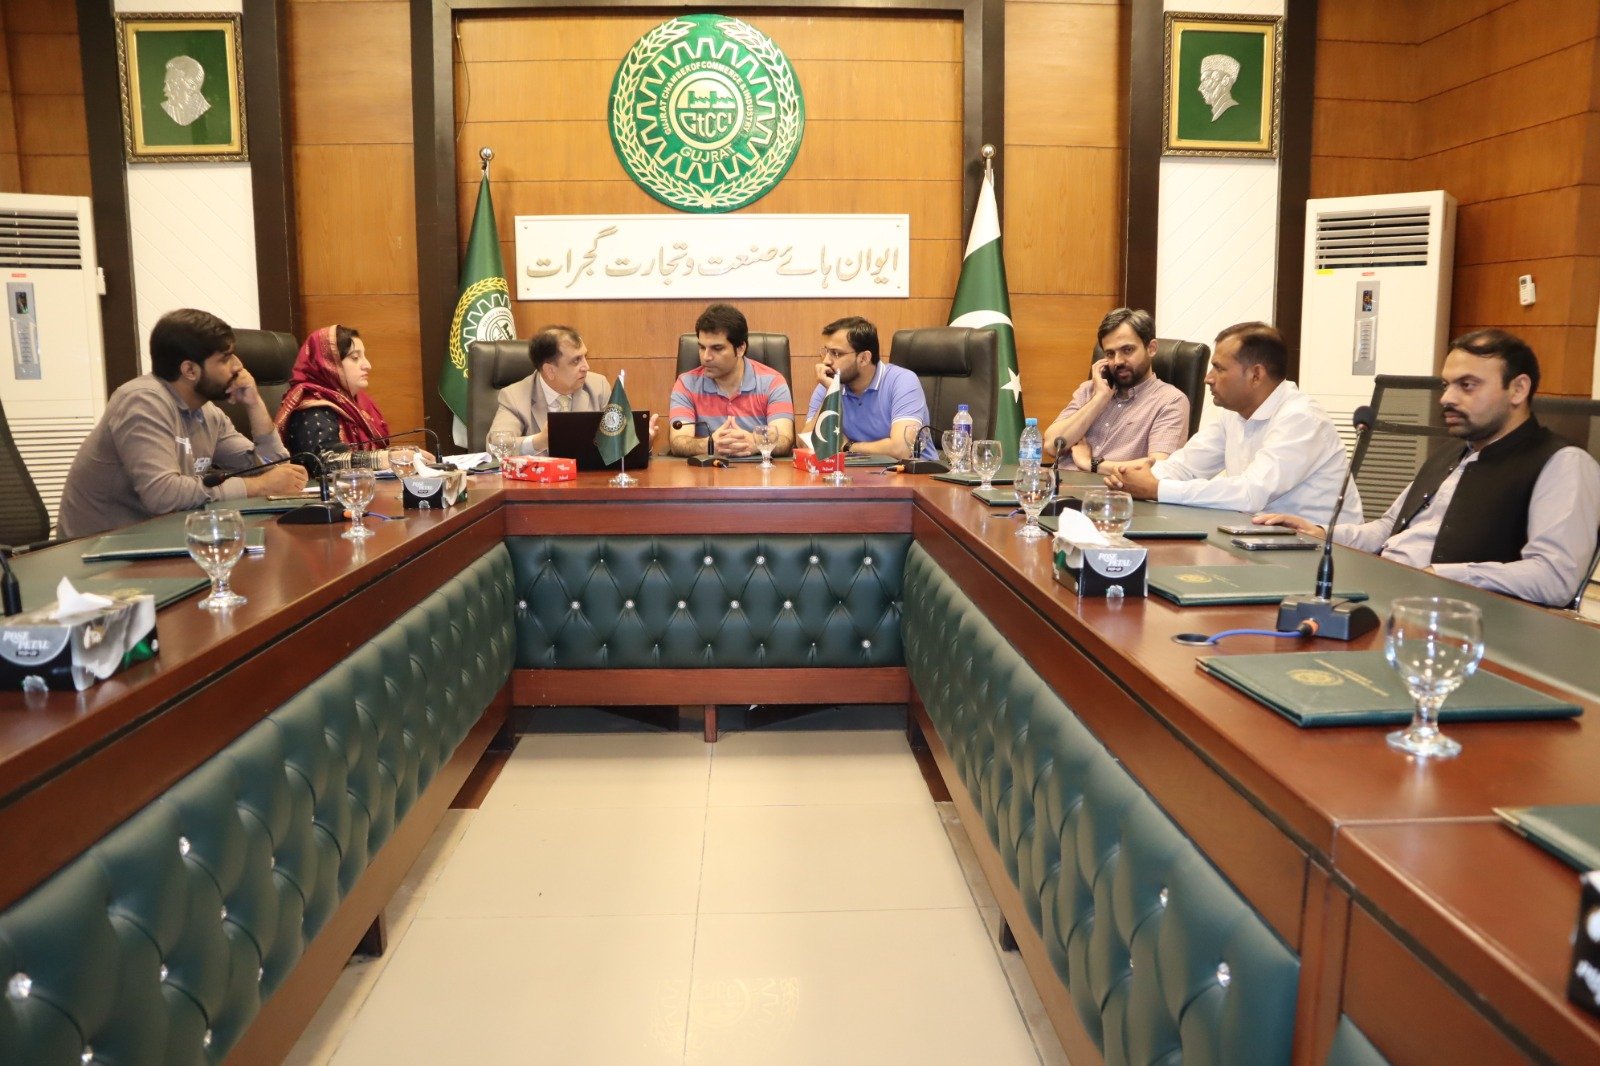 Commodore Retired Mr. Muhammad Irfan #Sitara_I_Imtiaz #Military, Director #Bahria University Advancement along with Miss. Shagufta Waseem coordinator endowment trust #Bahria #University #Islamabad visited Gujrat Chamber of Commerce and Industry #GtCCI.